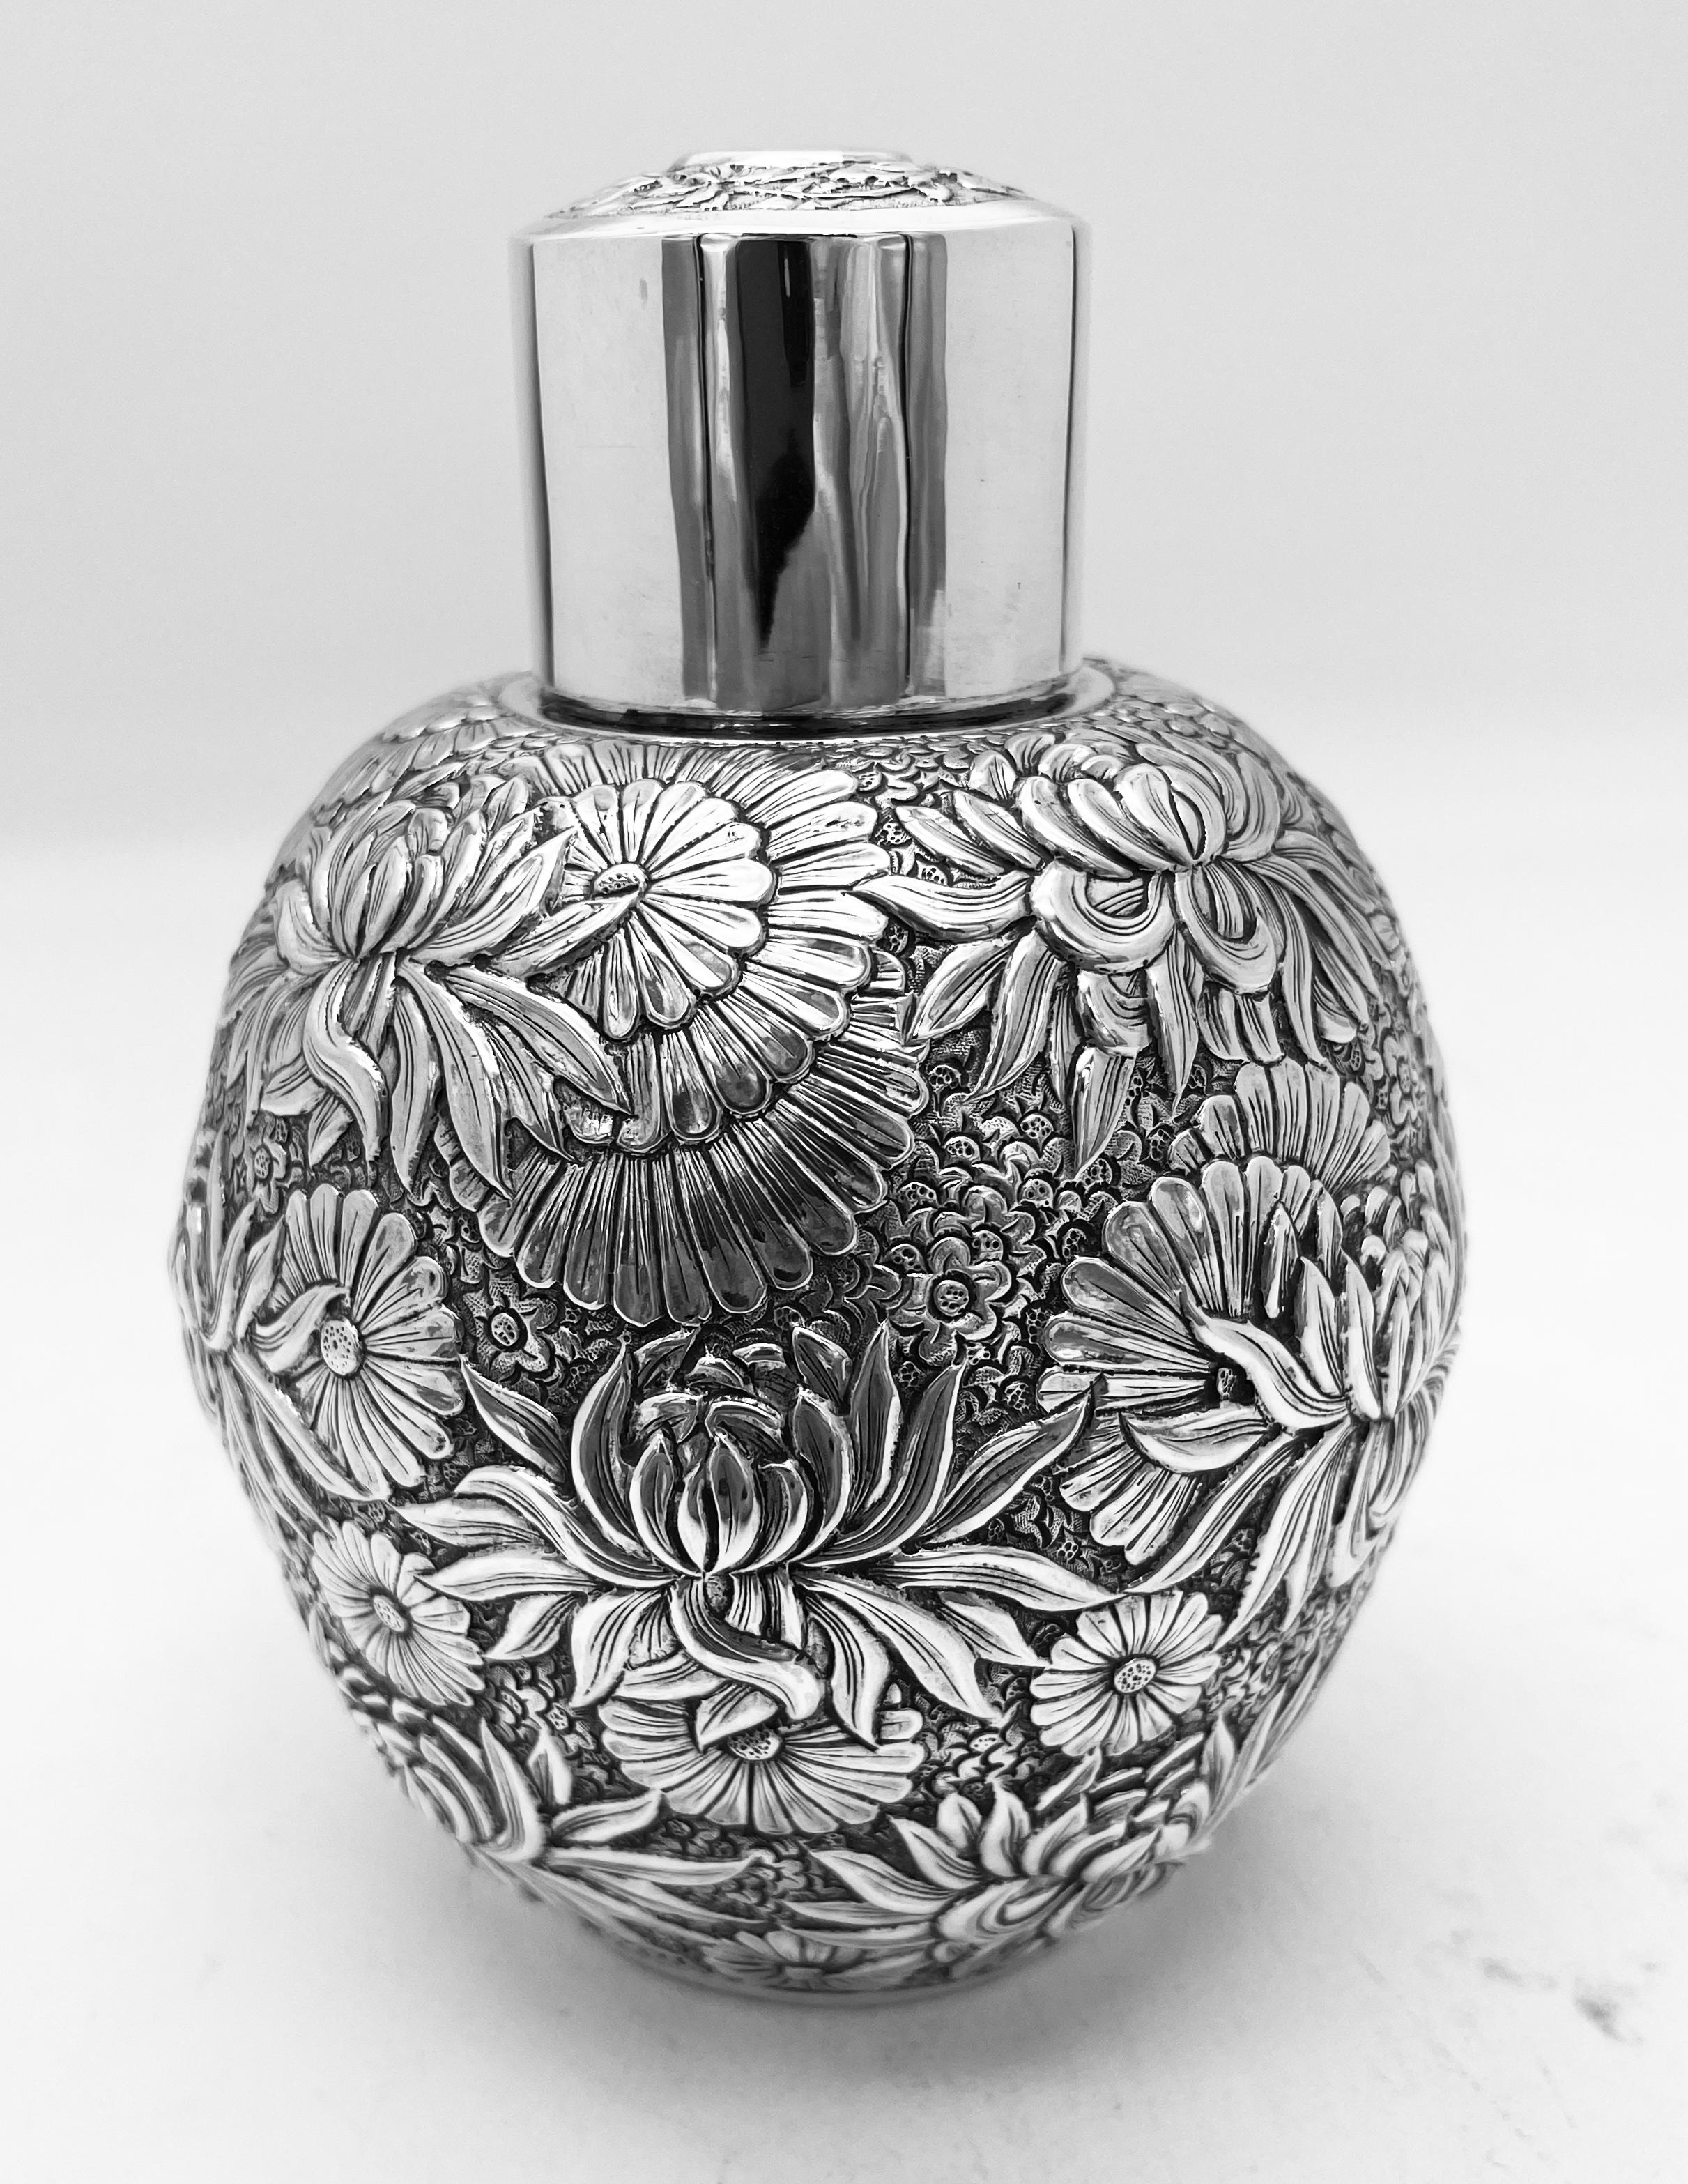 A Chinese Export Silver Tea Caddy chased and embossed all over with chrysanthemum, circa 1890. The jar was retailed by HC (Hung Chong). Hung Chong was located in Shanghai and Canton, and was one of the first and longest-lasting Cantonese western